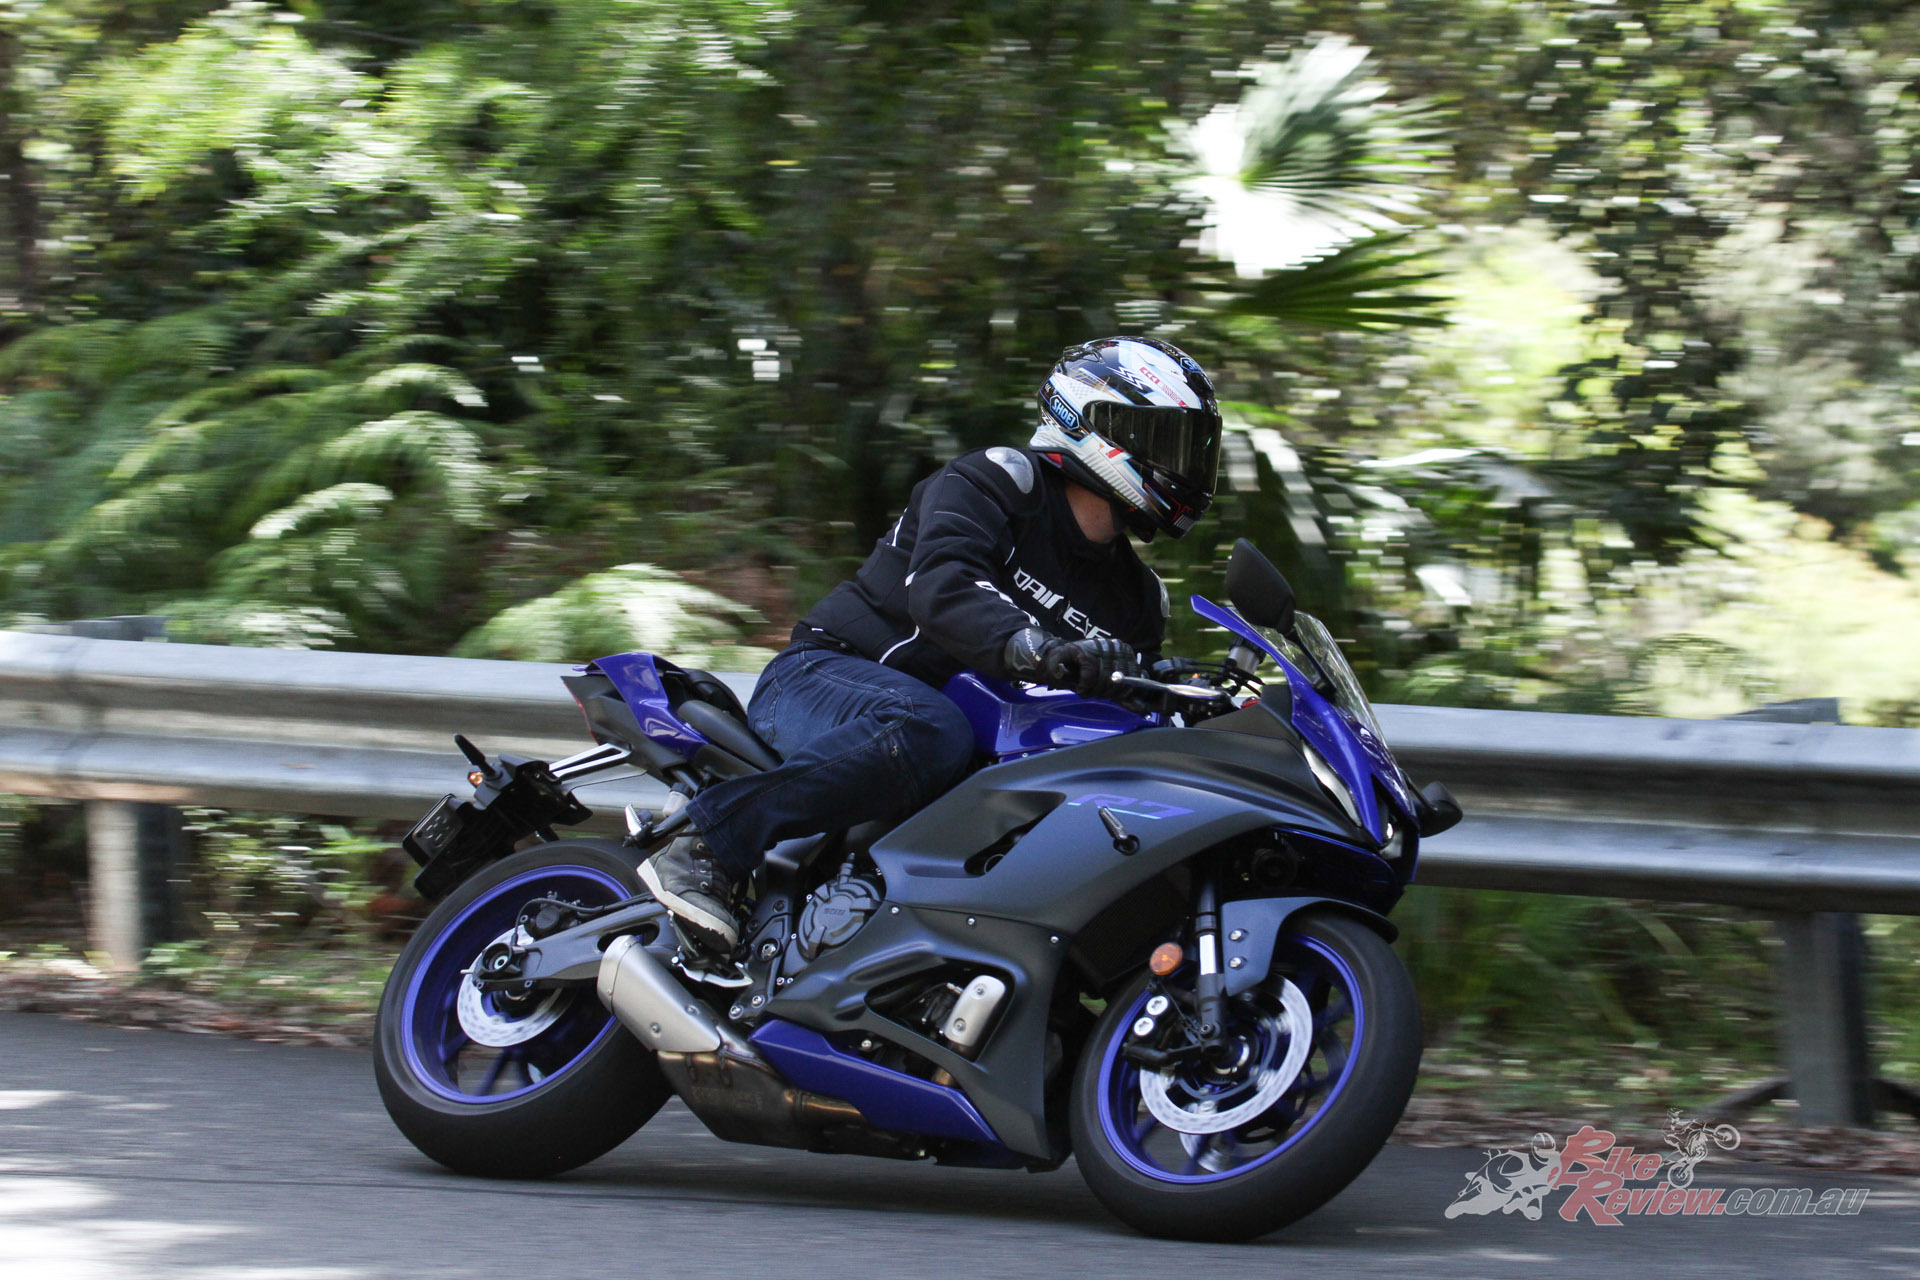 While performance is a key-factor in what makes the R7 a fun bike to ride. The cost to smile factor is off the charts!